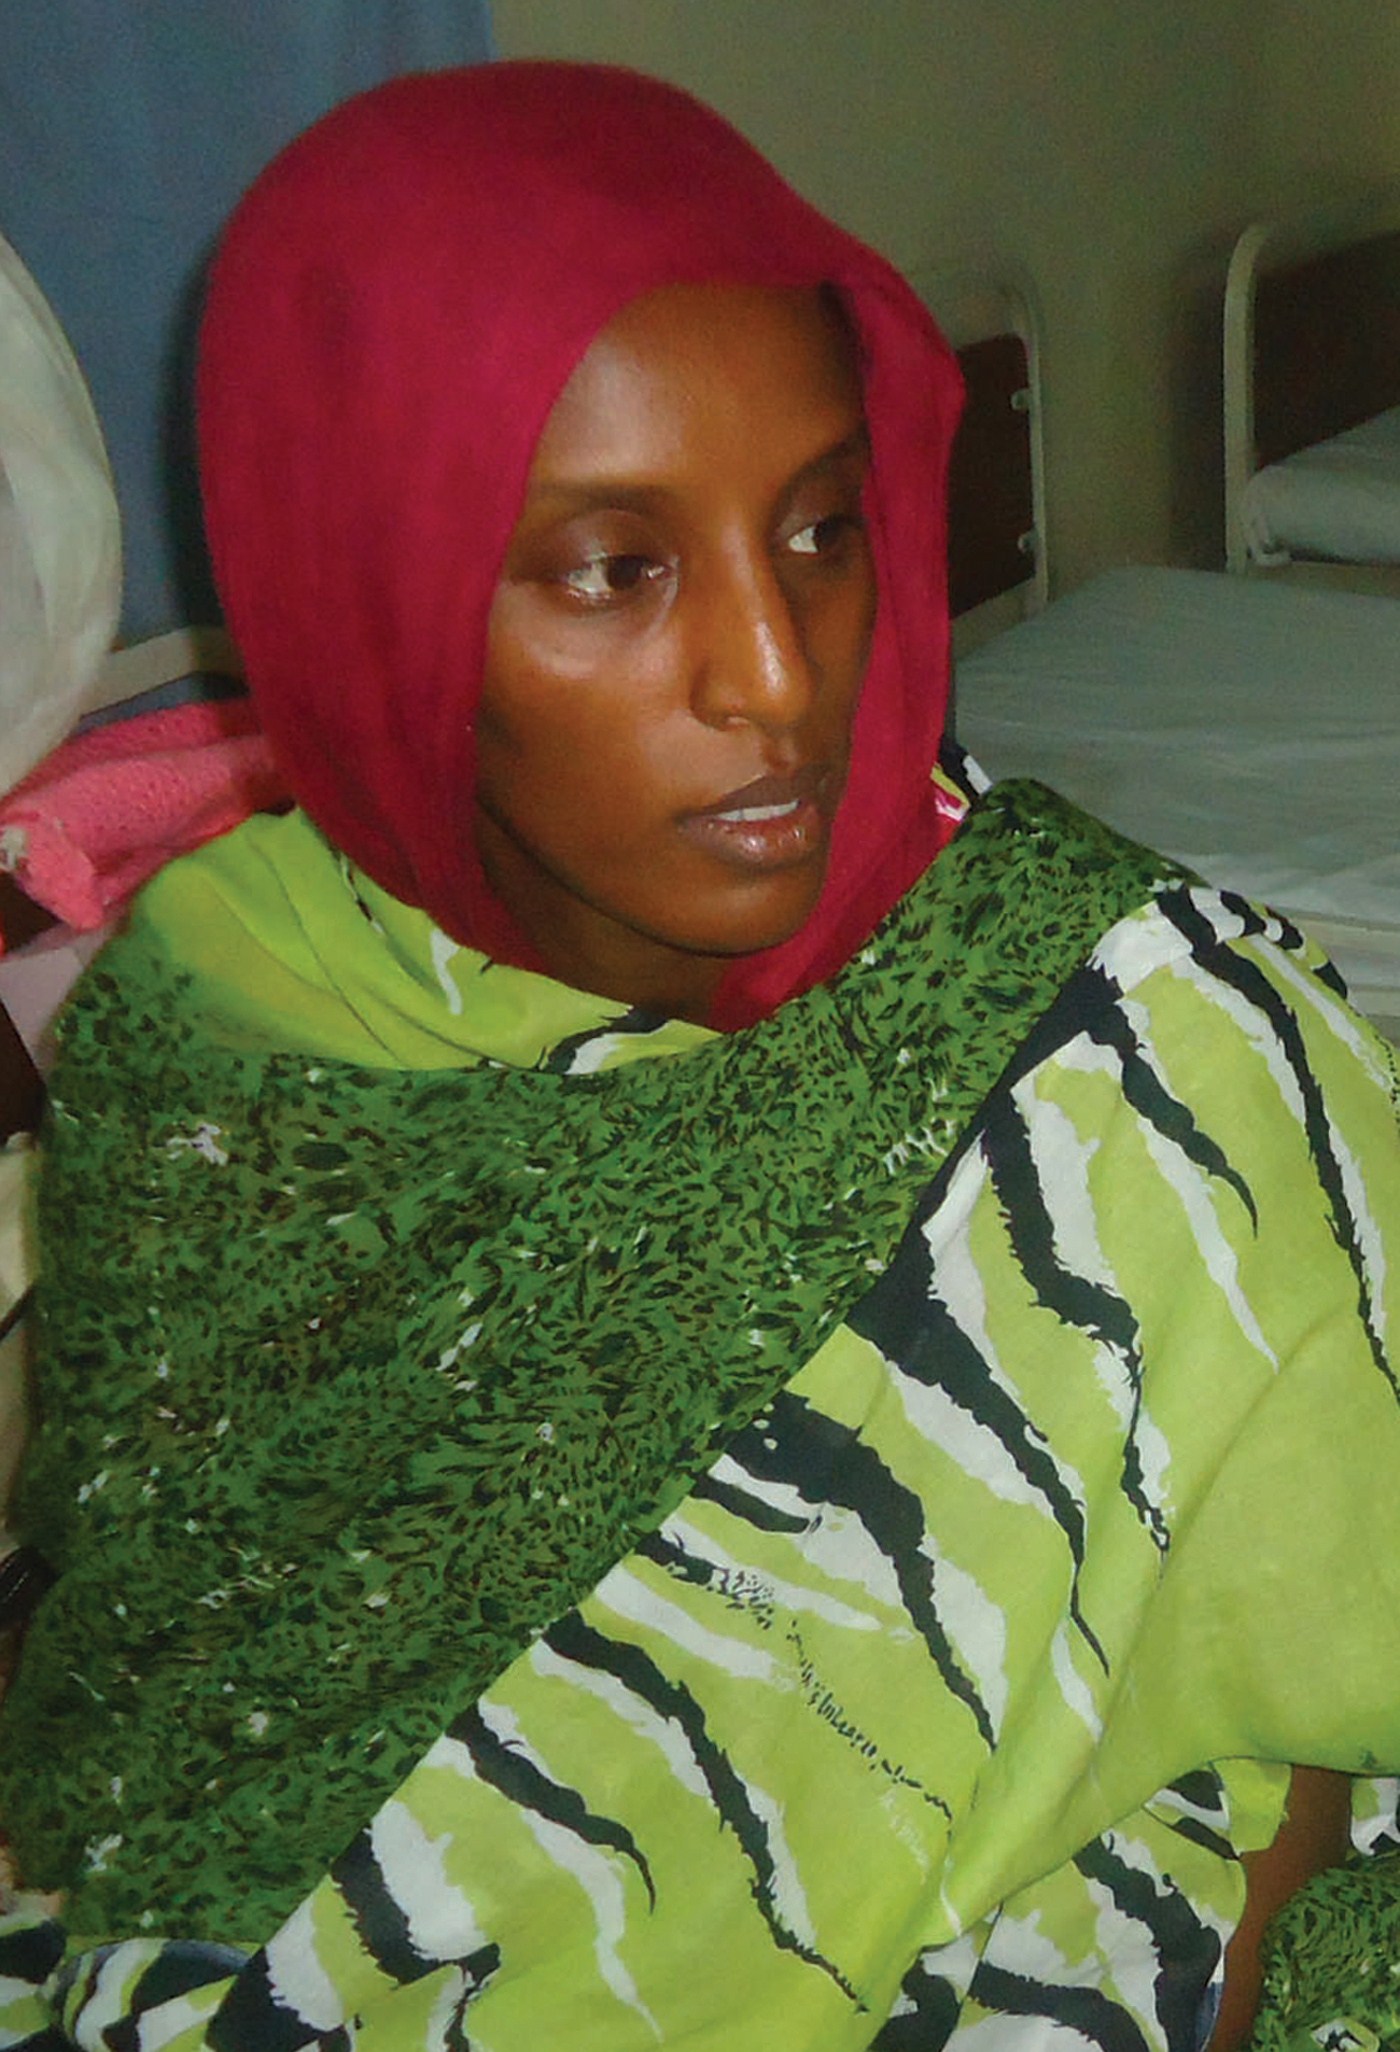 Meriam Yahia Ibrahim Ishag, a 27-year-old Christian Sudanese woman sentenced to hang for apostasy, sits in her cell a day after she gave birth to a baby girl at a women's prison in Khartoum's twin city of Omdurman (AFP/Getty Images)